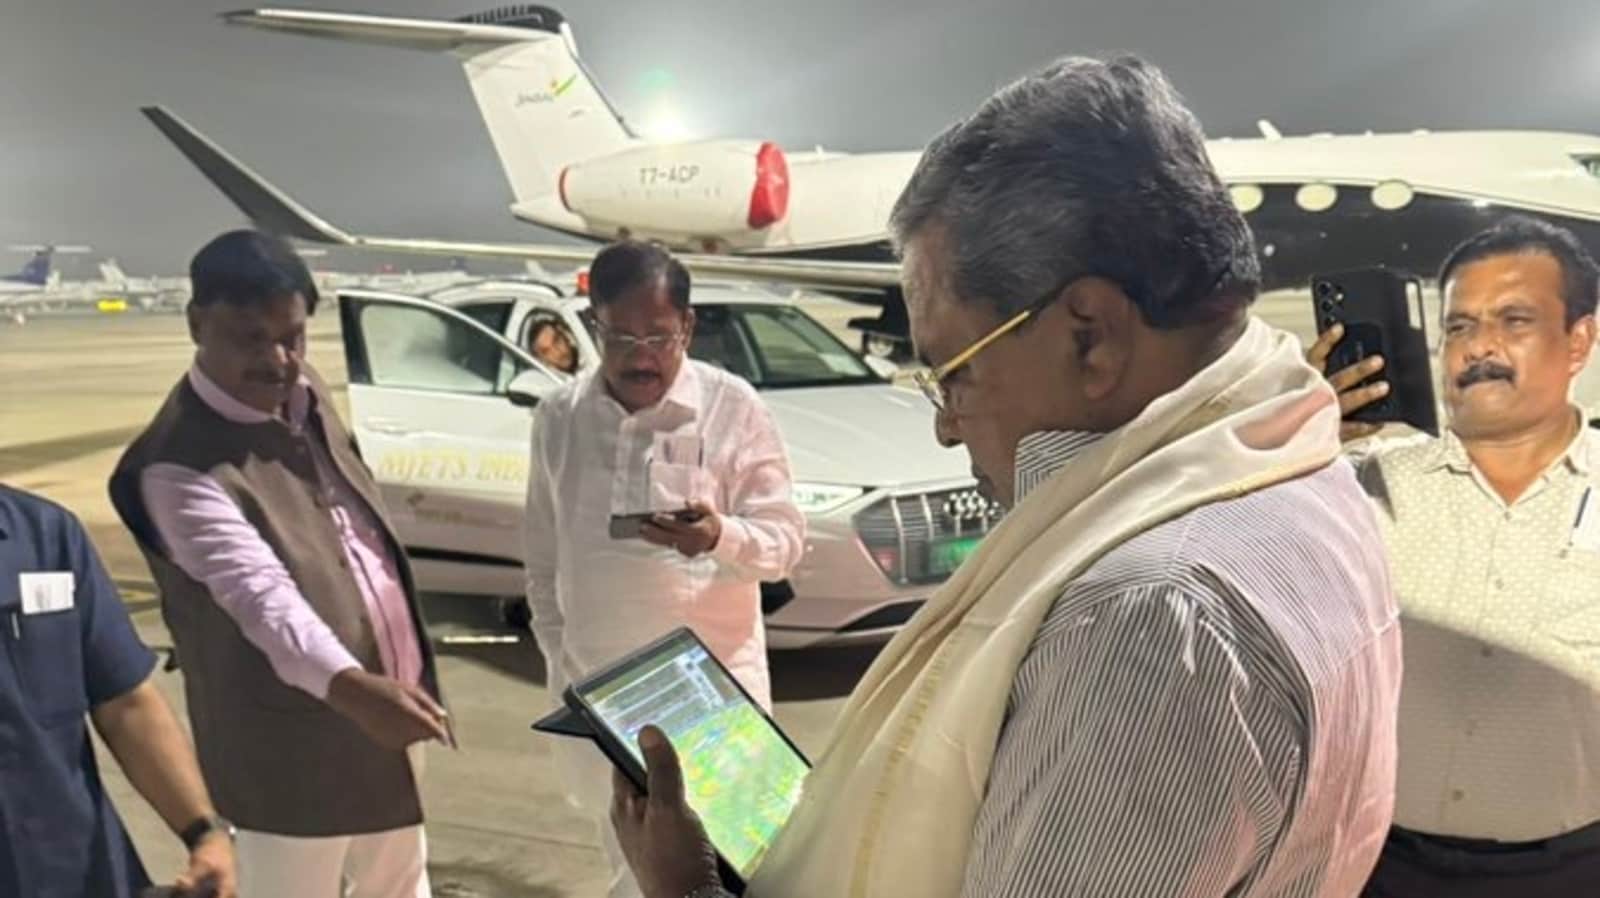 CM Siddaramaiah caught in T20 World Cup fever moments before boarding flight to Delhi